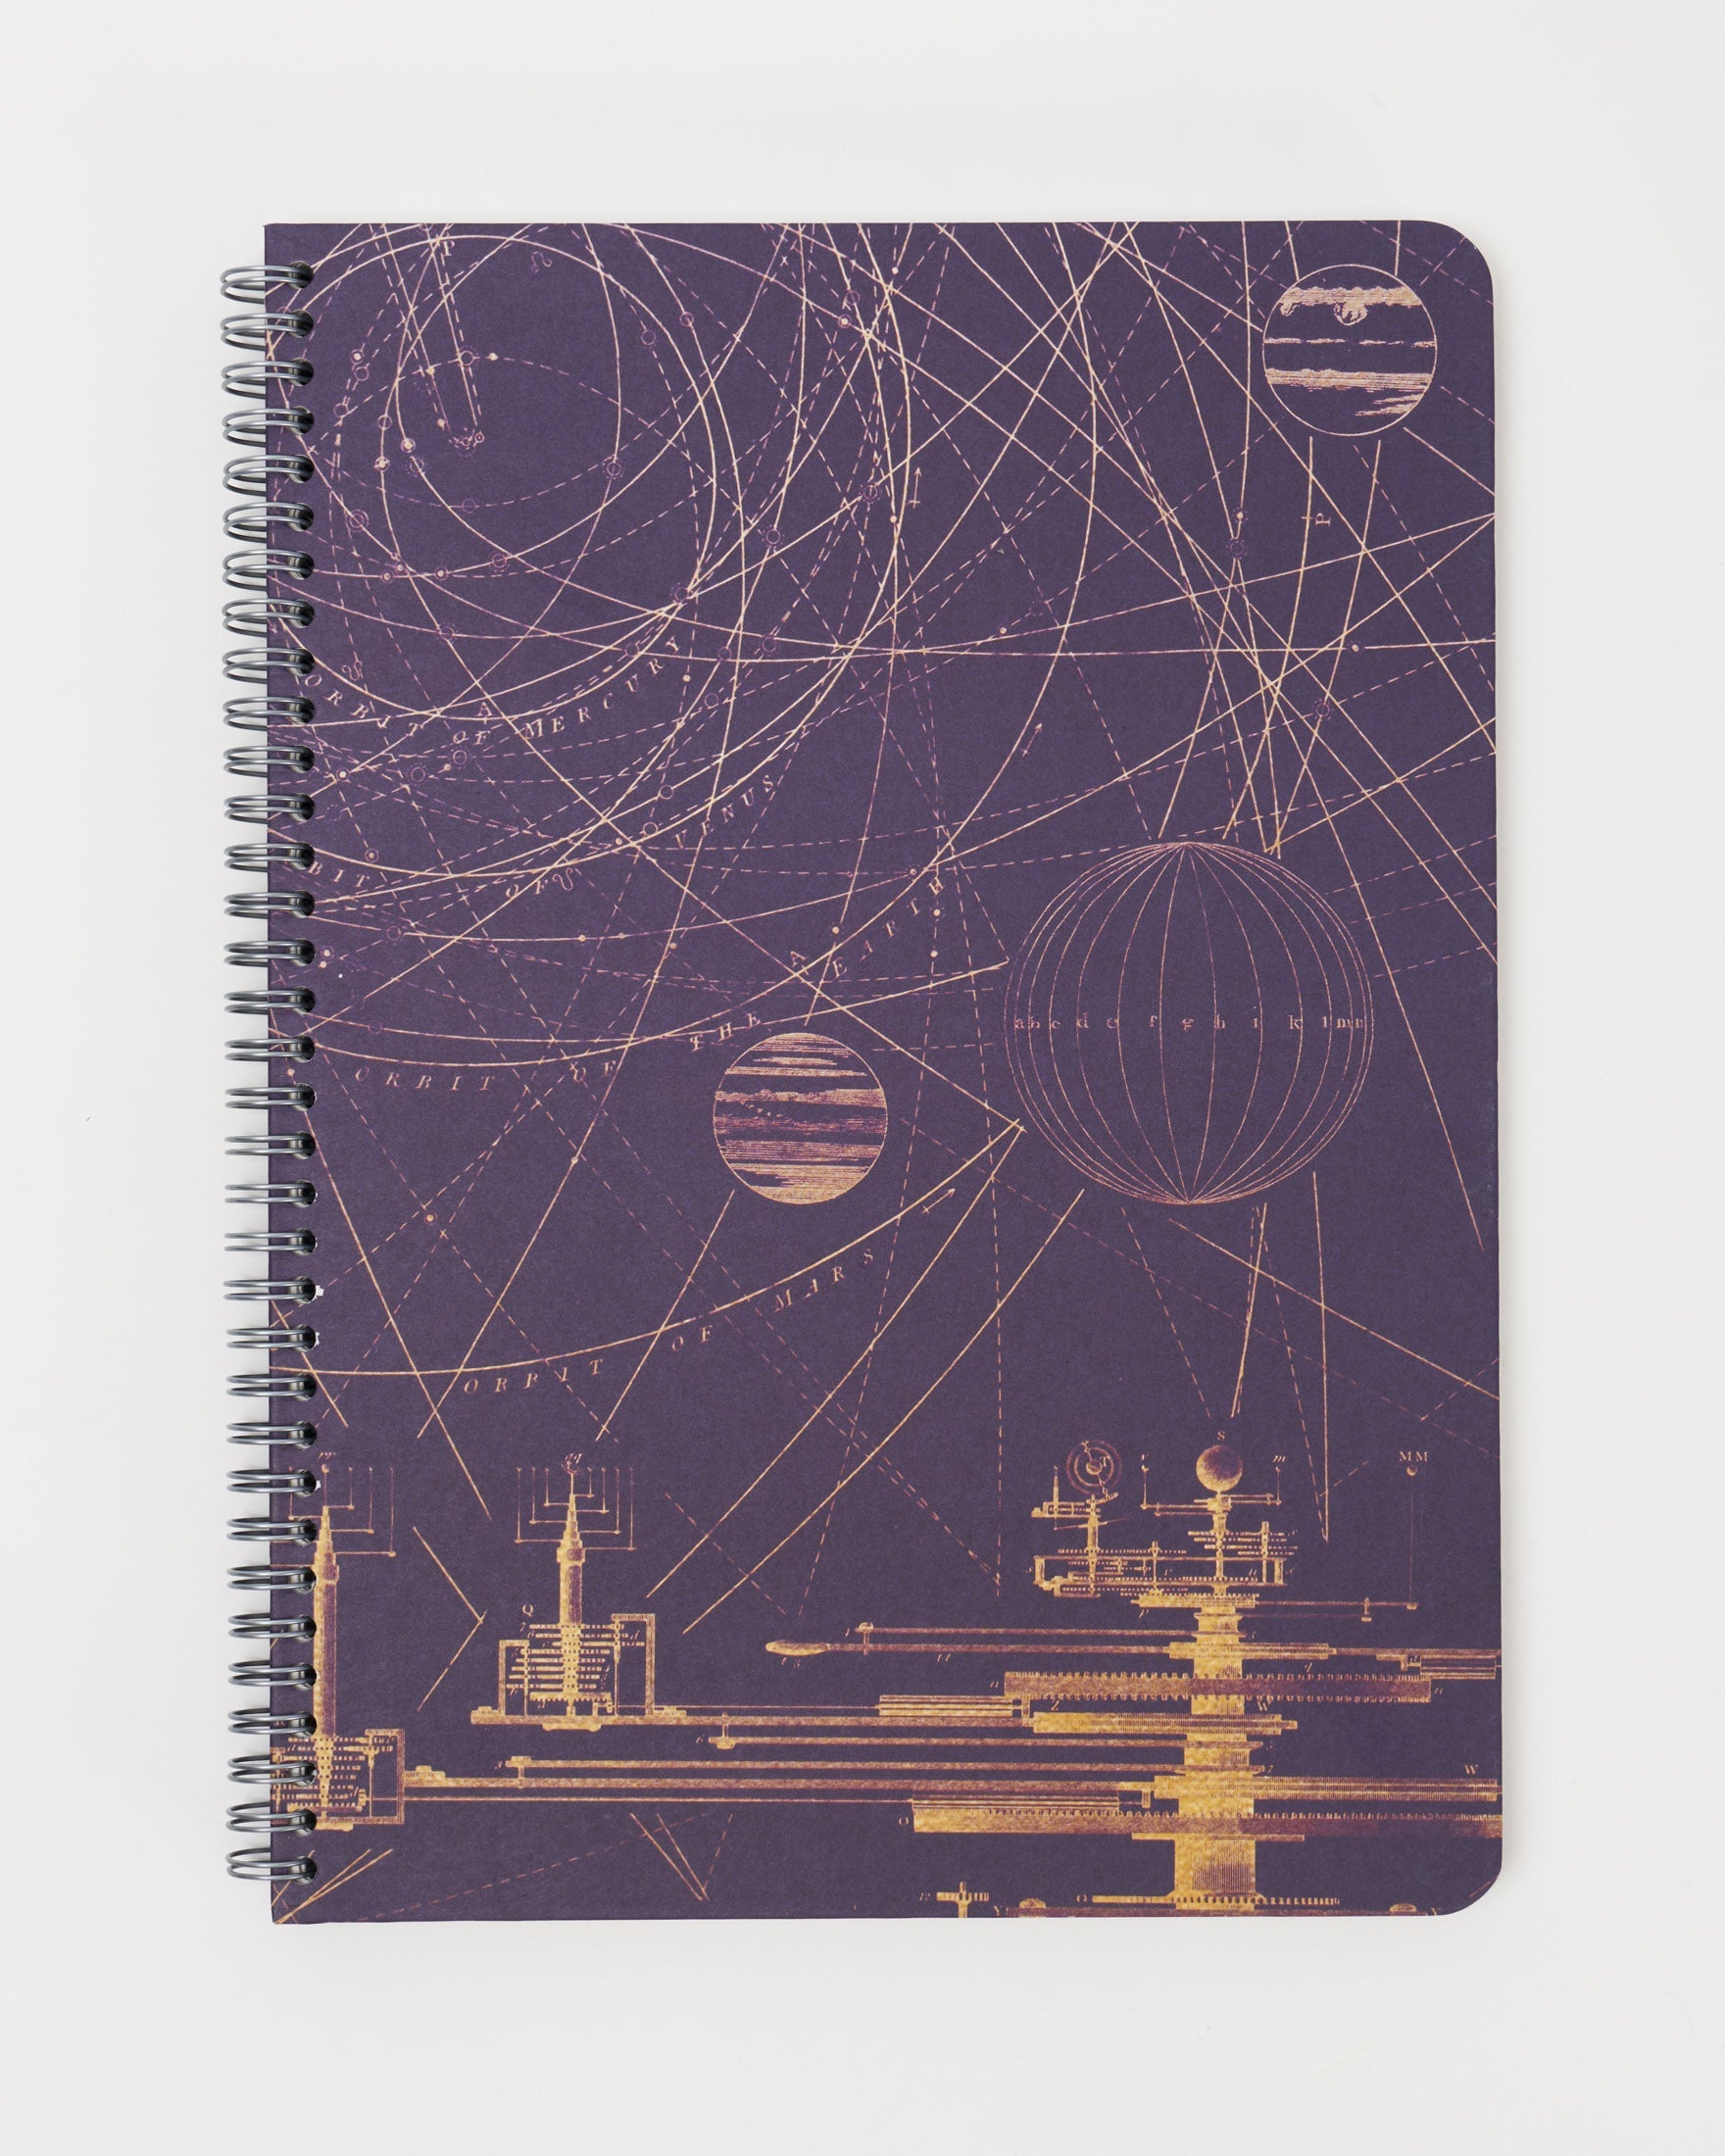 Planetary Motion in Orbit Spiral Notebook